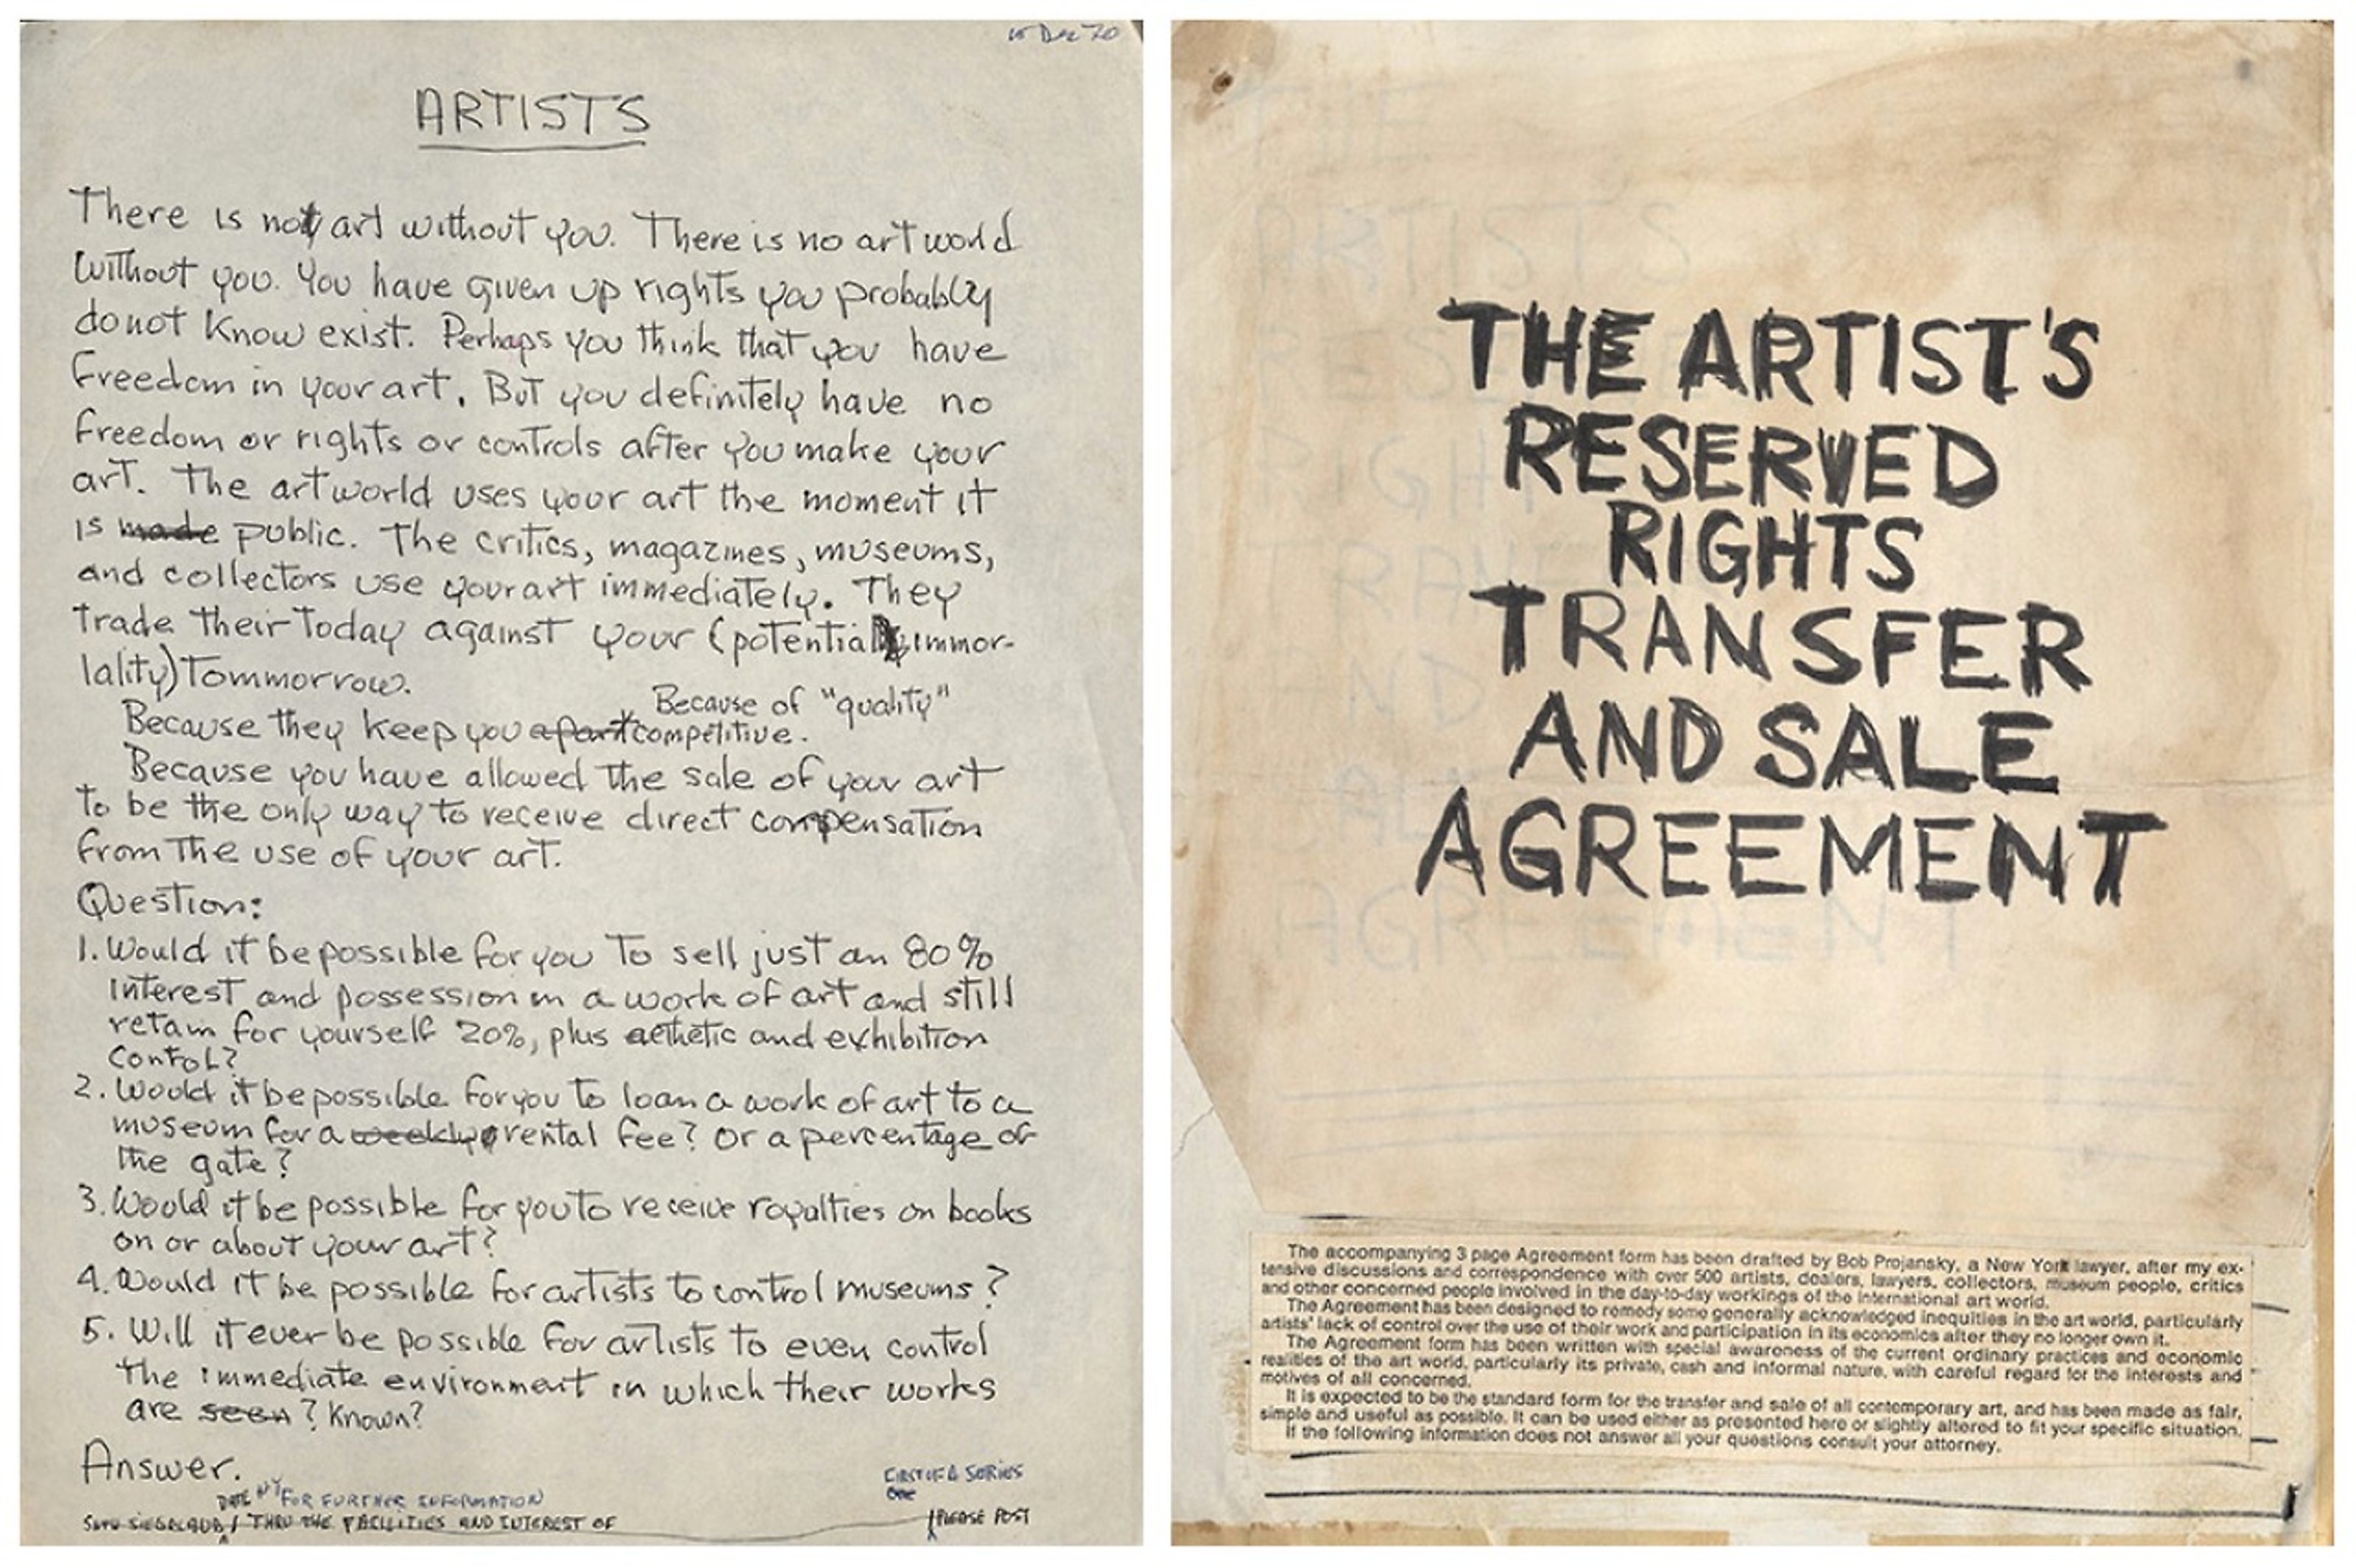 Seth Siegelaub, handwritten appeal to artists, 1970: "There is not art without you. There is no artworld without you. You have given up rights you probably do not know exist. Perhaps you think that you have freedom in your art. But you definitely have no freedom or right or controls after you make your art. The artworld uses your art the moment it is public. The critics, magazines, museums, and collectors use your art immediately. They trade their today against your (potential immortality( tomorrow. Because they keep you becasue of "quality" competitive. Because you have allowed the sale of your art to be the only way to receive direct compensation from the use of your art. Question: 1. Would it be possible for you to sell just an 80% inerest and possession in a work of art and still retain for yourself 20%, plus esthetic and exhibition control? 2. Would it be possible for you to loam a work of art to a museum for a rental fee? Or a percentage of the gate? 3. Would it be possible for you to receive royalties on books on or about your art? 4. Would it be possible for artists to control museums? 5. Will it ever be possible for artists to even control the immediate environment in which their works are known? Answer."  Mockup cover of The Artist’s Reserved Rights Transfer and Sale Agreement, 1971. "THE ARTIST'S RESERVED RIGHTS TRANSFER AND SALE AGREEMENT"